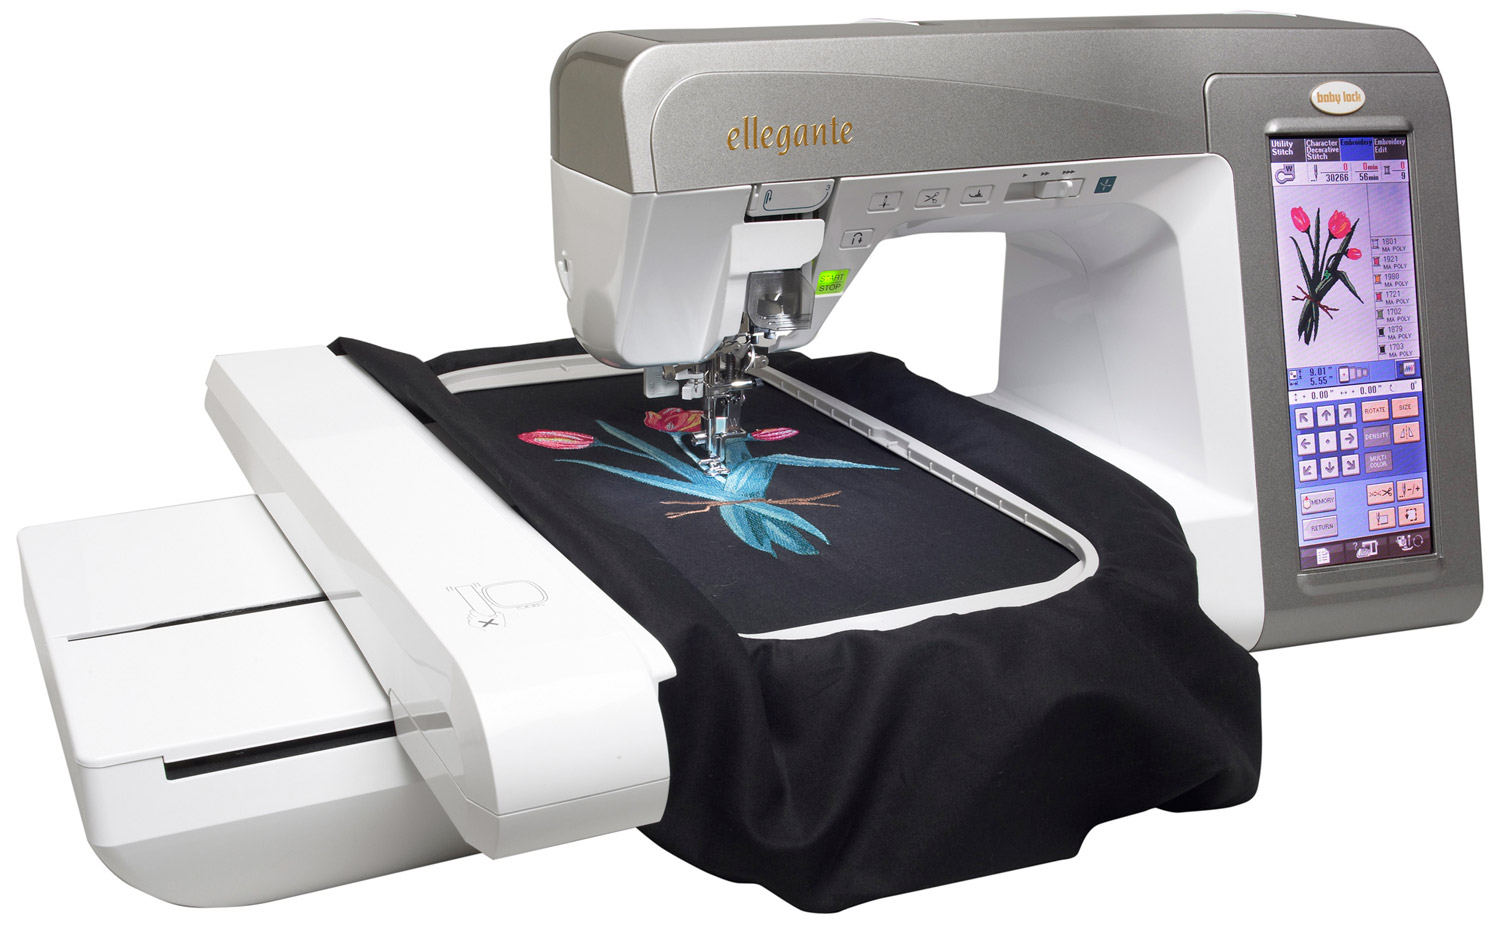 Brother Sewing Machine Embroidery Patterns 8 Embroidery Machine Reviews To Help Your Selection Process Better